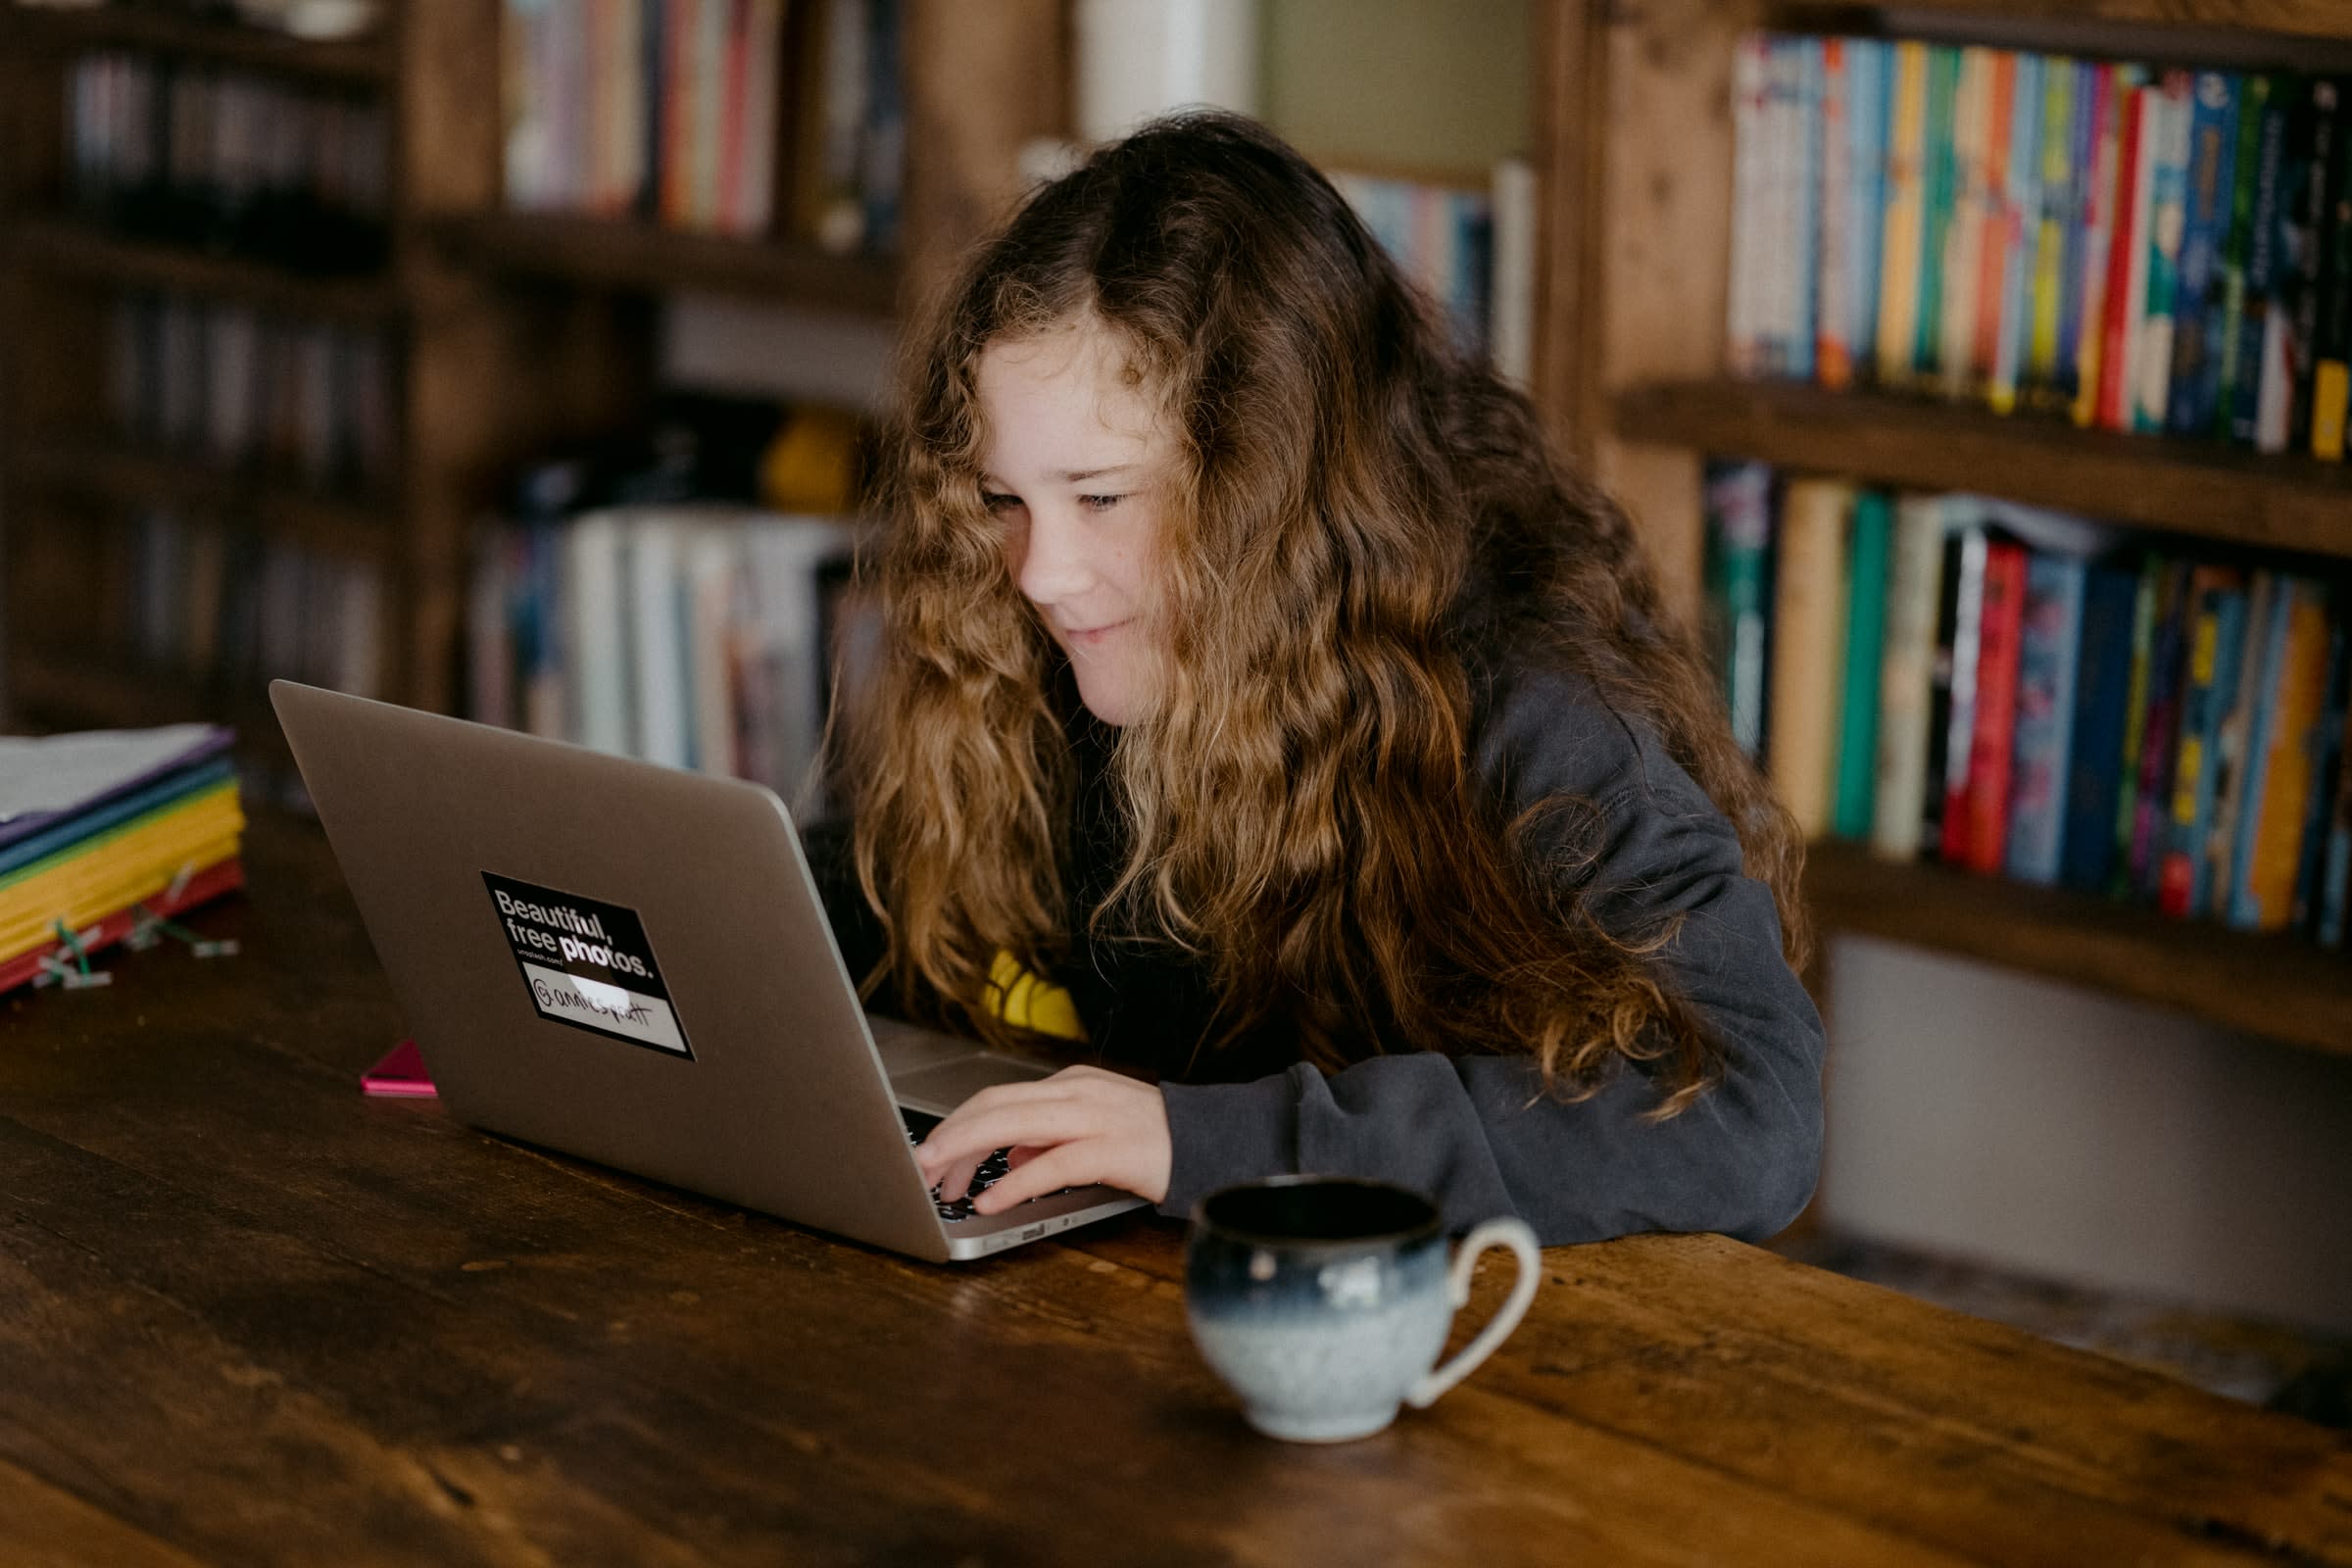 A girl with curly hair smiles at her laptop in front of a bookcase